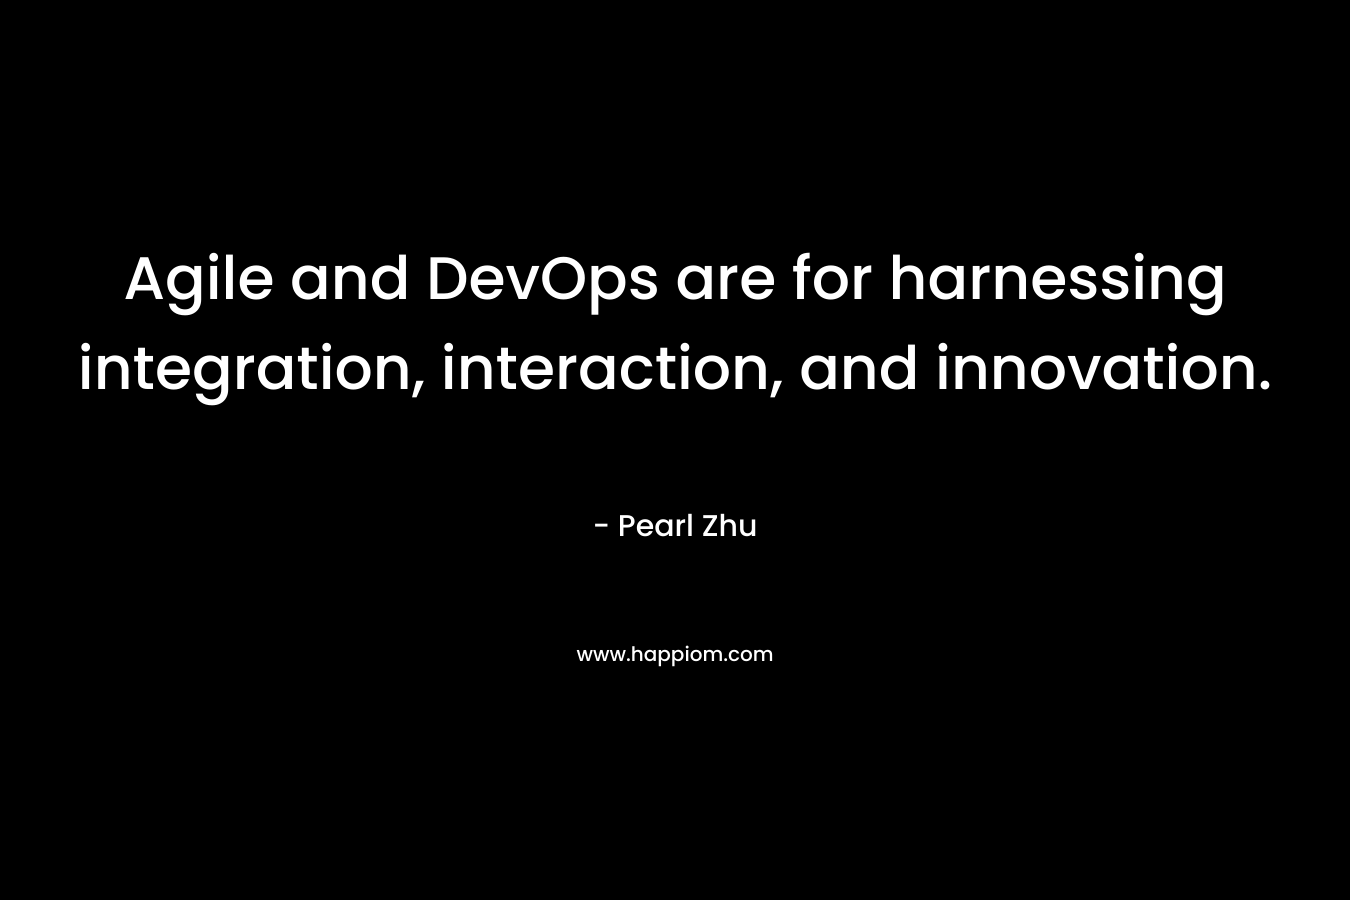 Agile and DevOps are for harnessing integration, interaction, and innovation.